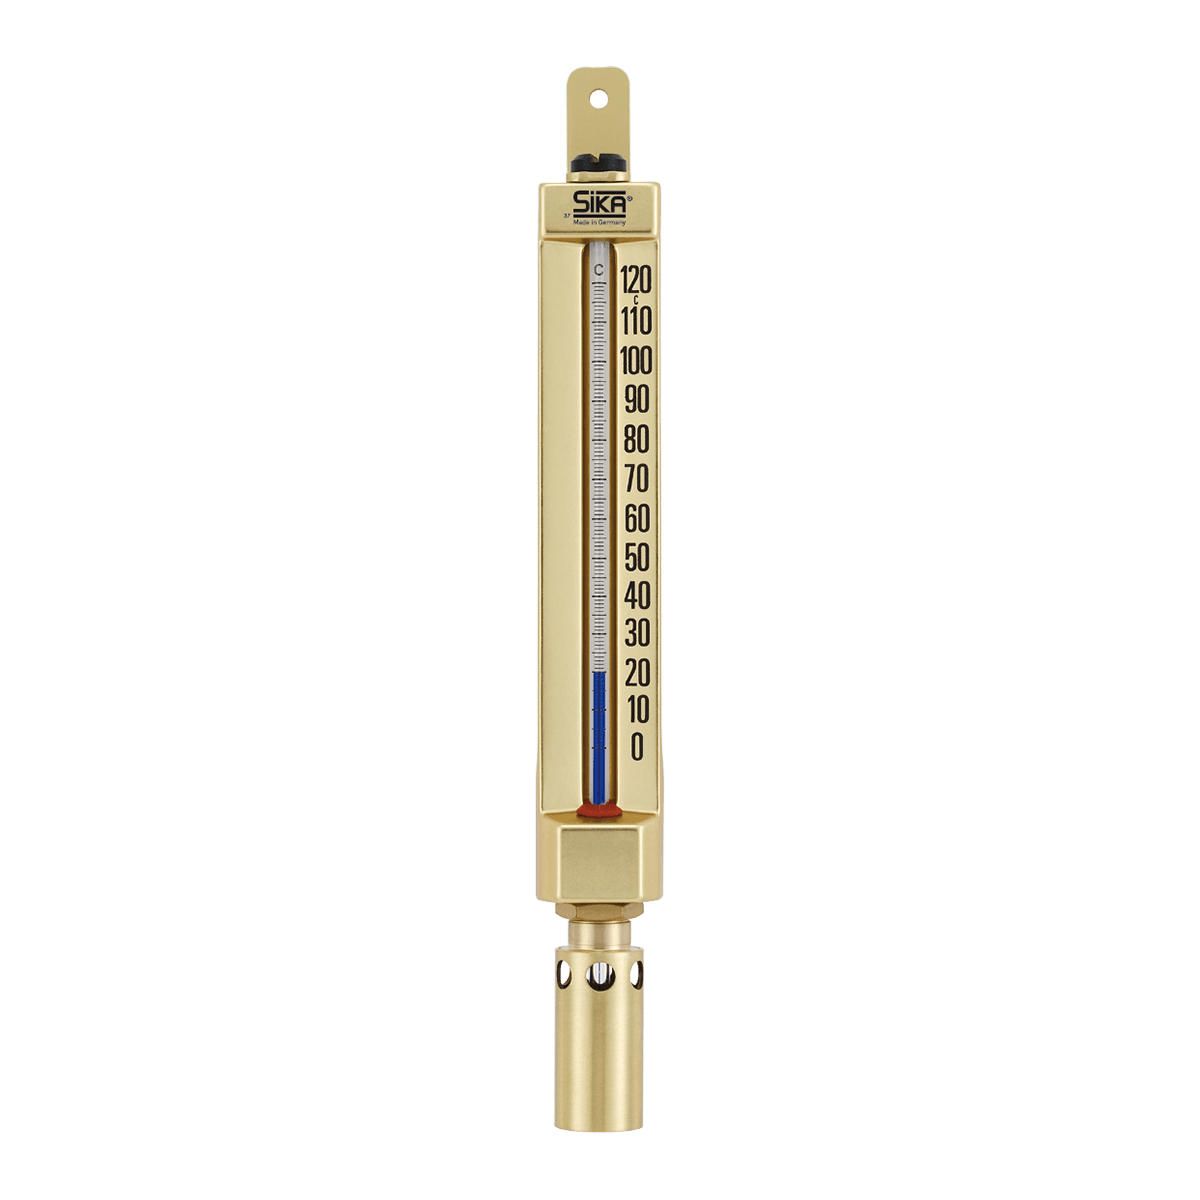 Sika Maschinenthermometer Eckform 3/4" Neuteil Heizungs Thermometer 100 Grad 